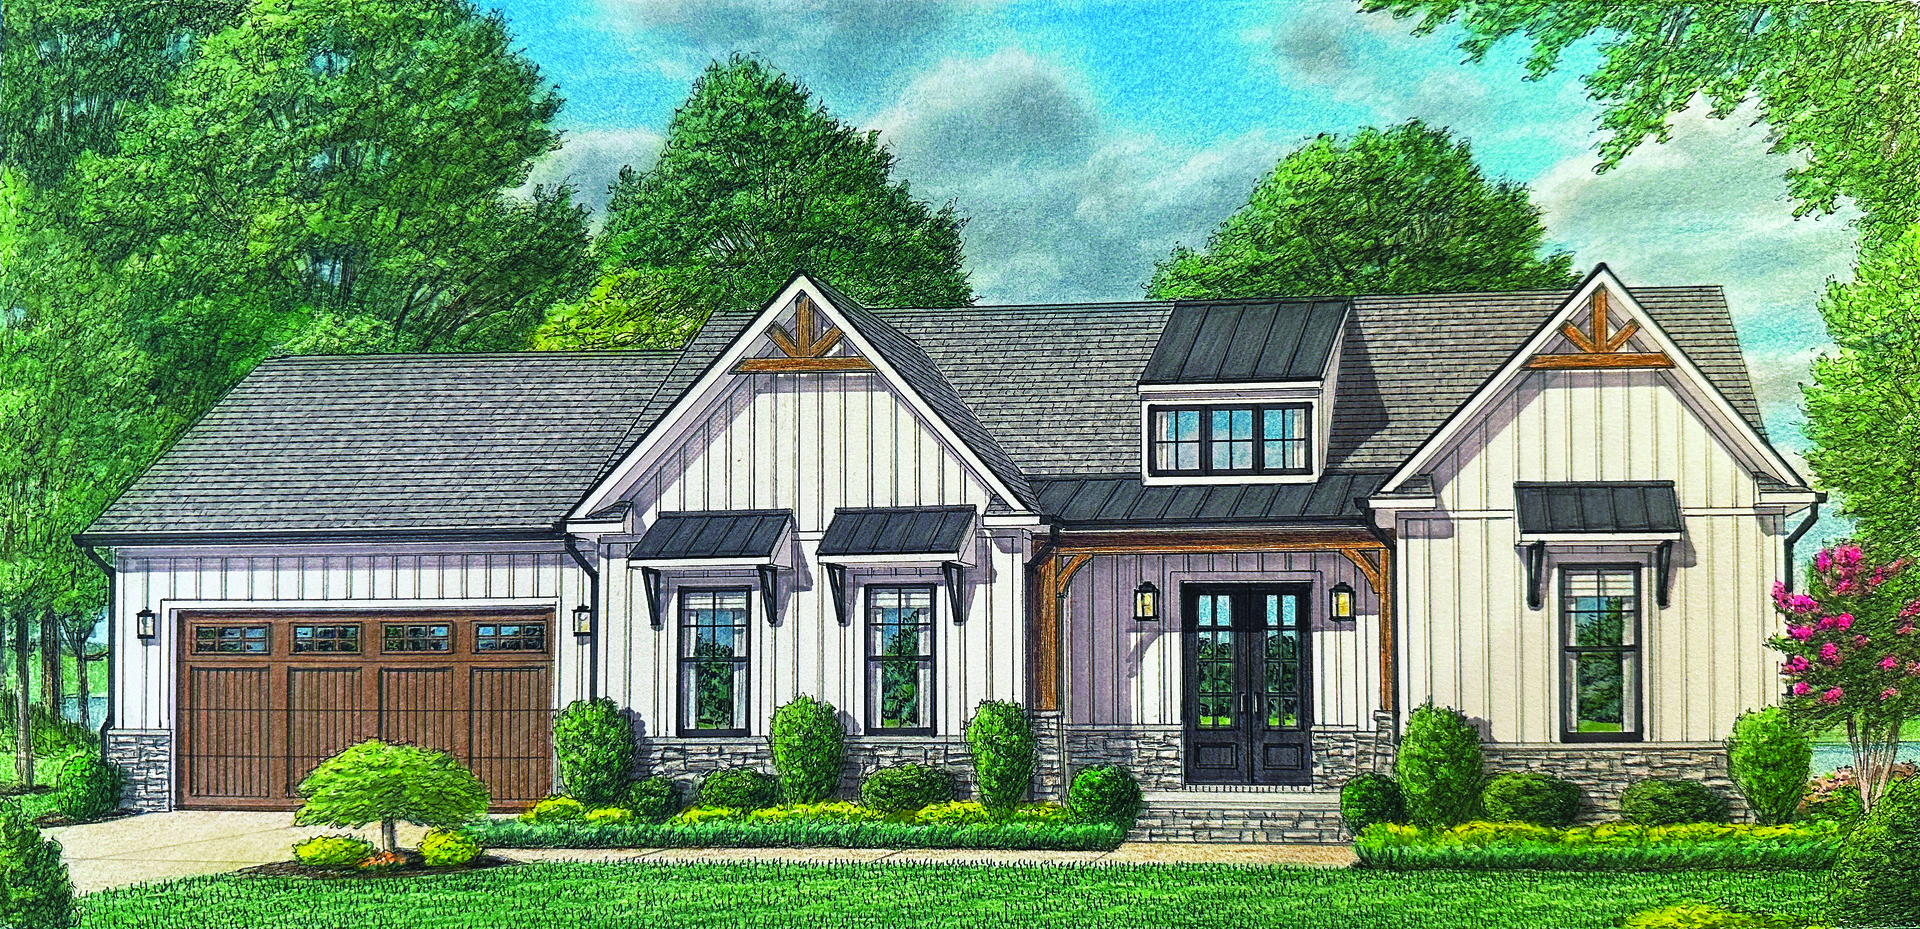 The Escape Front Elevation Rendering